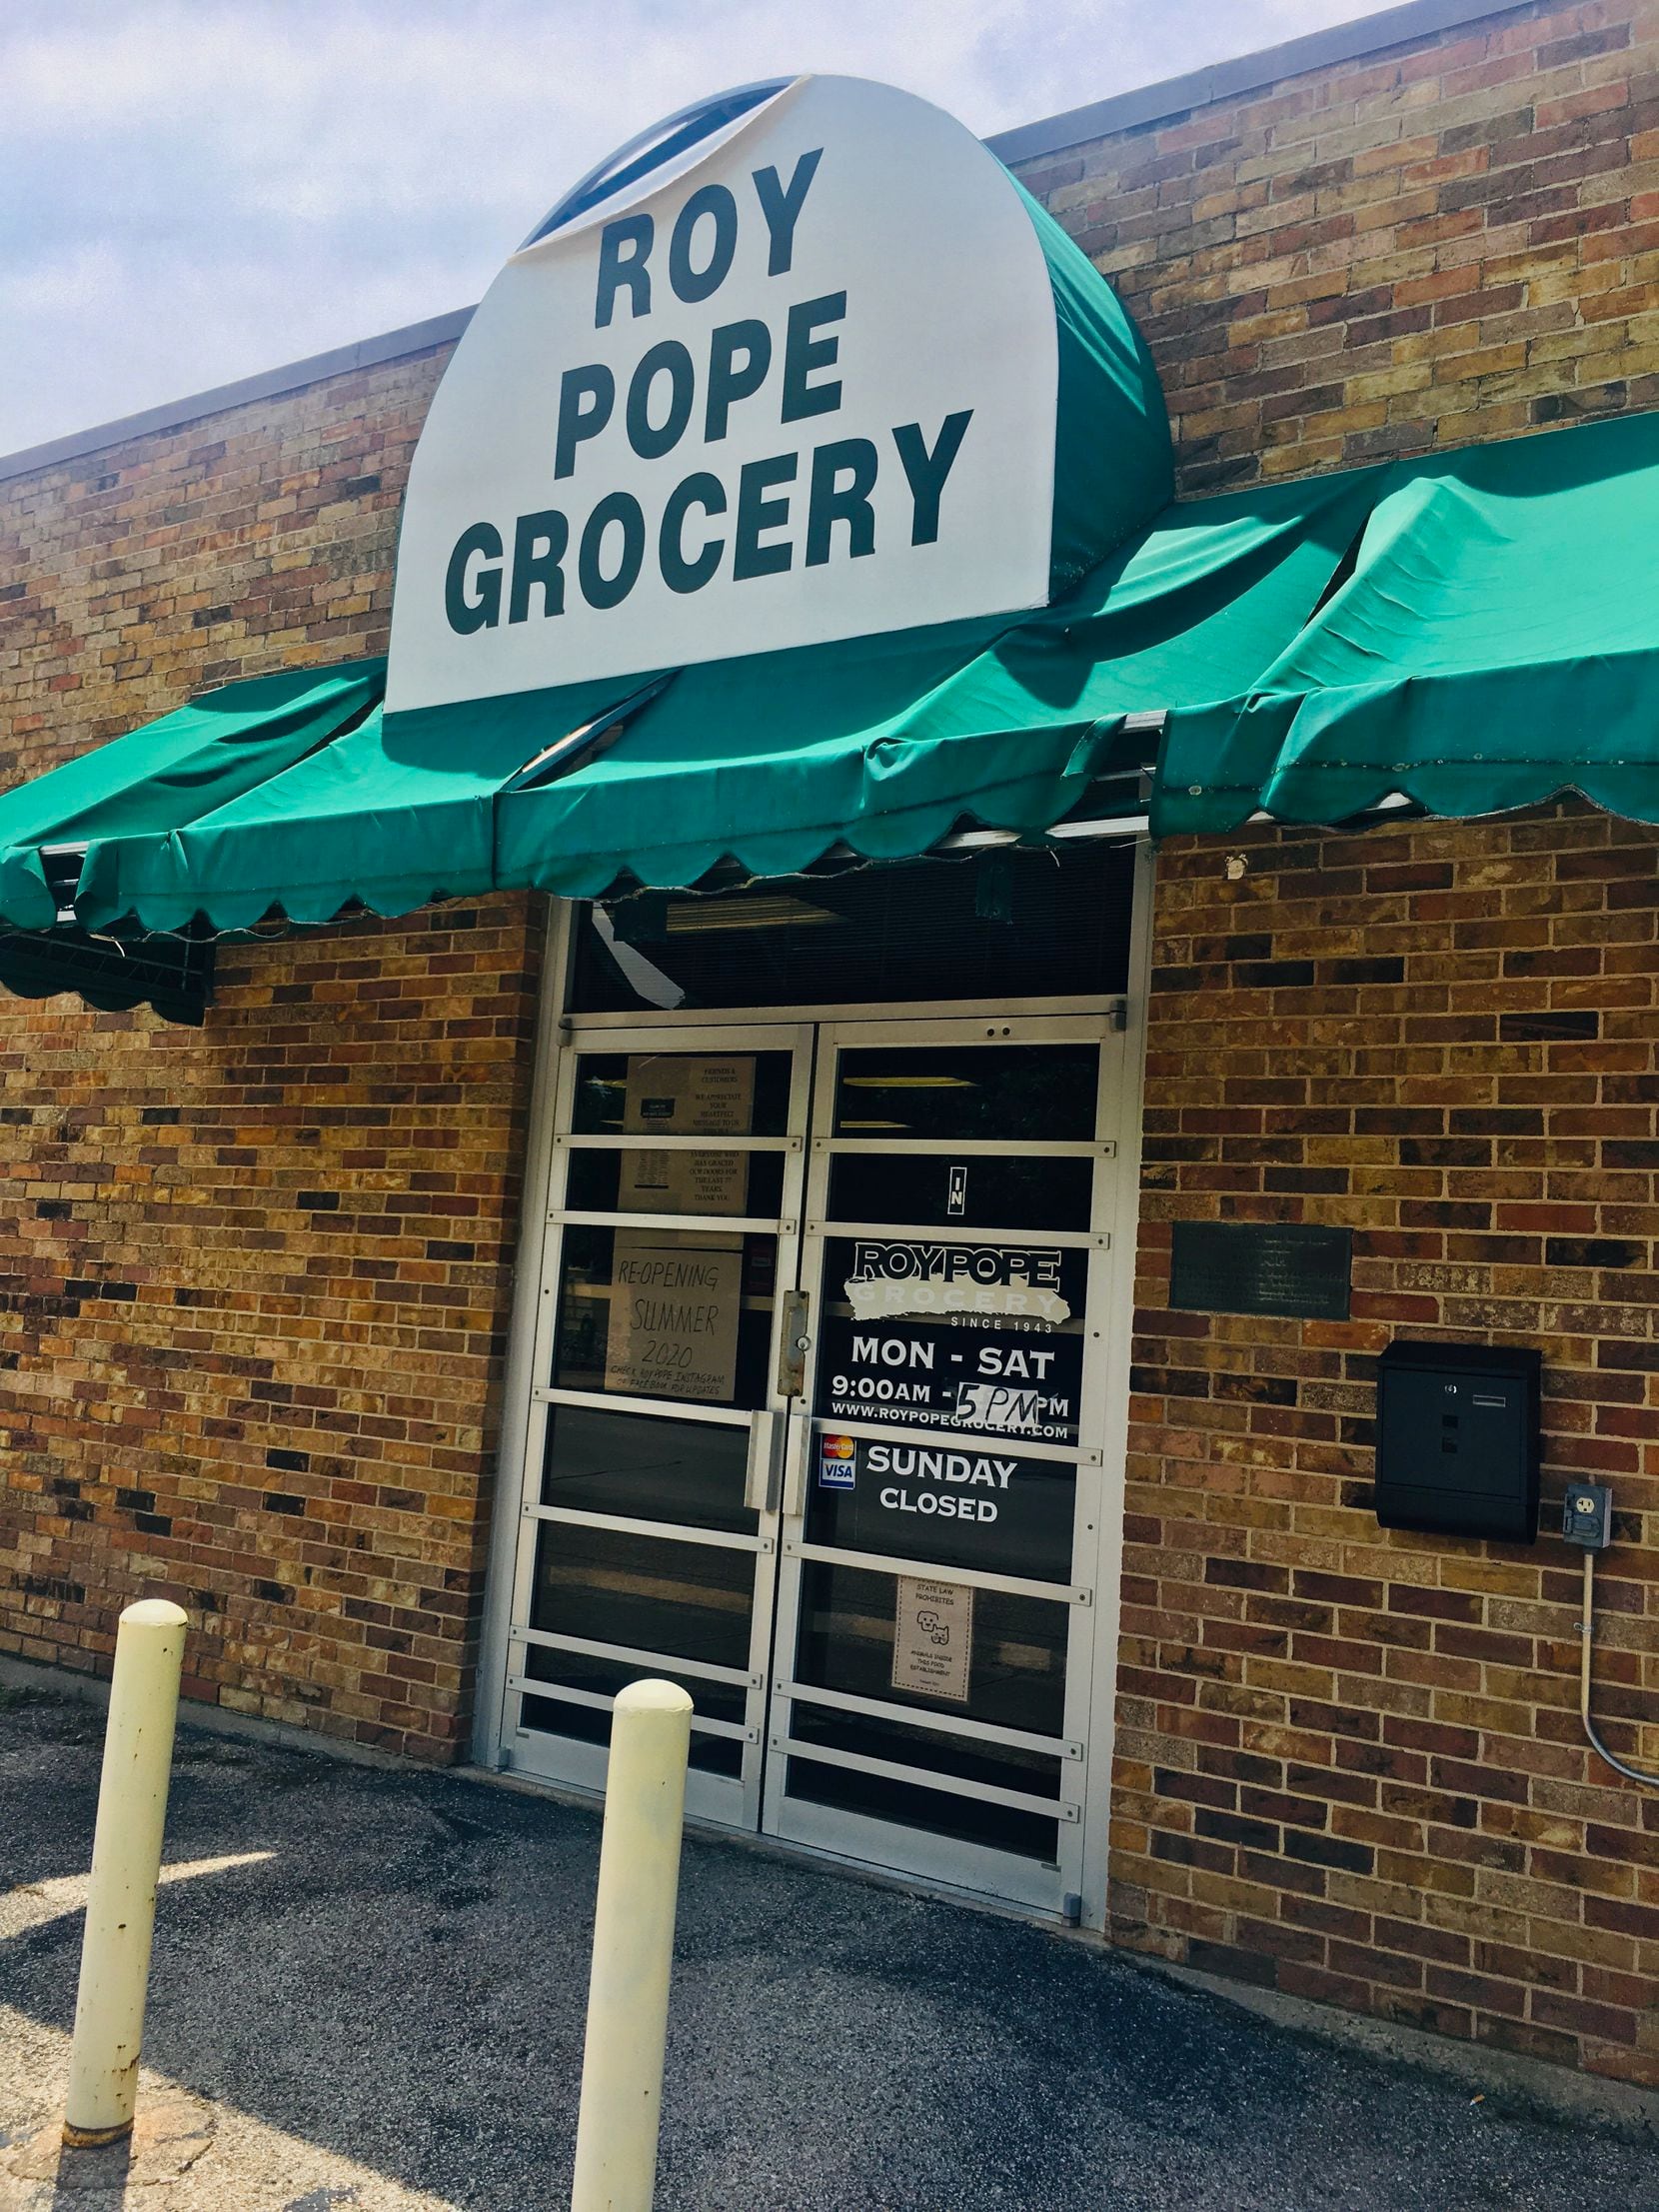 The original storefront of Roy Pope Grocery before the massive remodel in 2020.